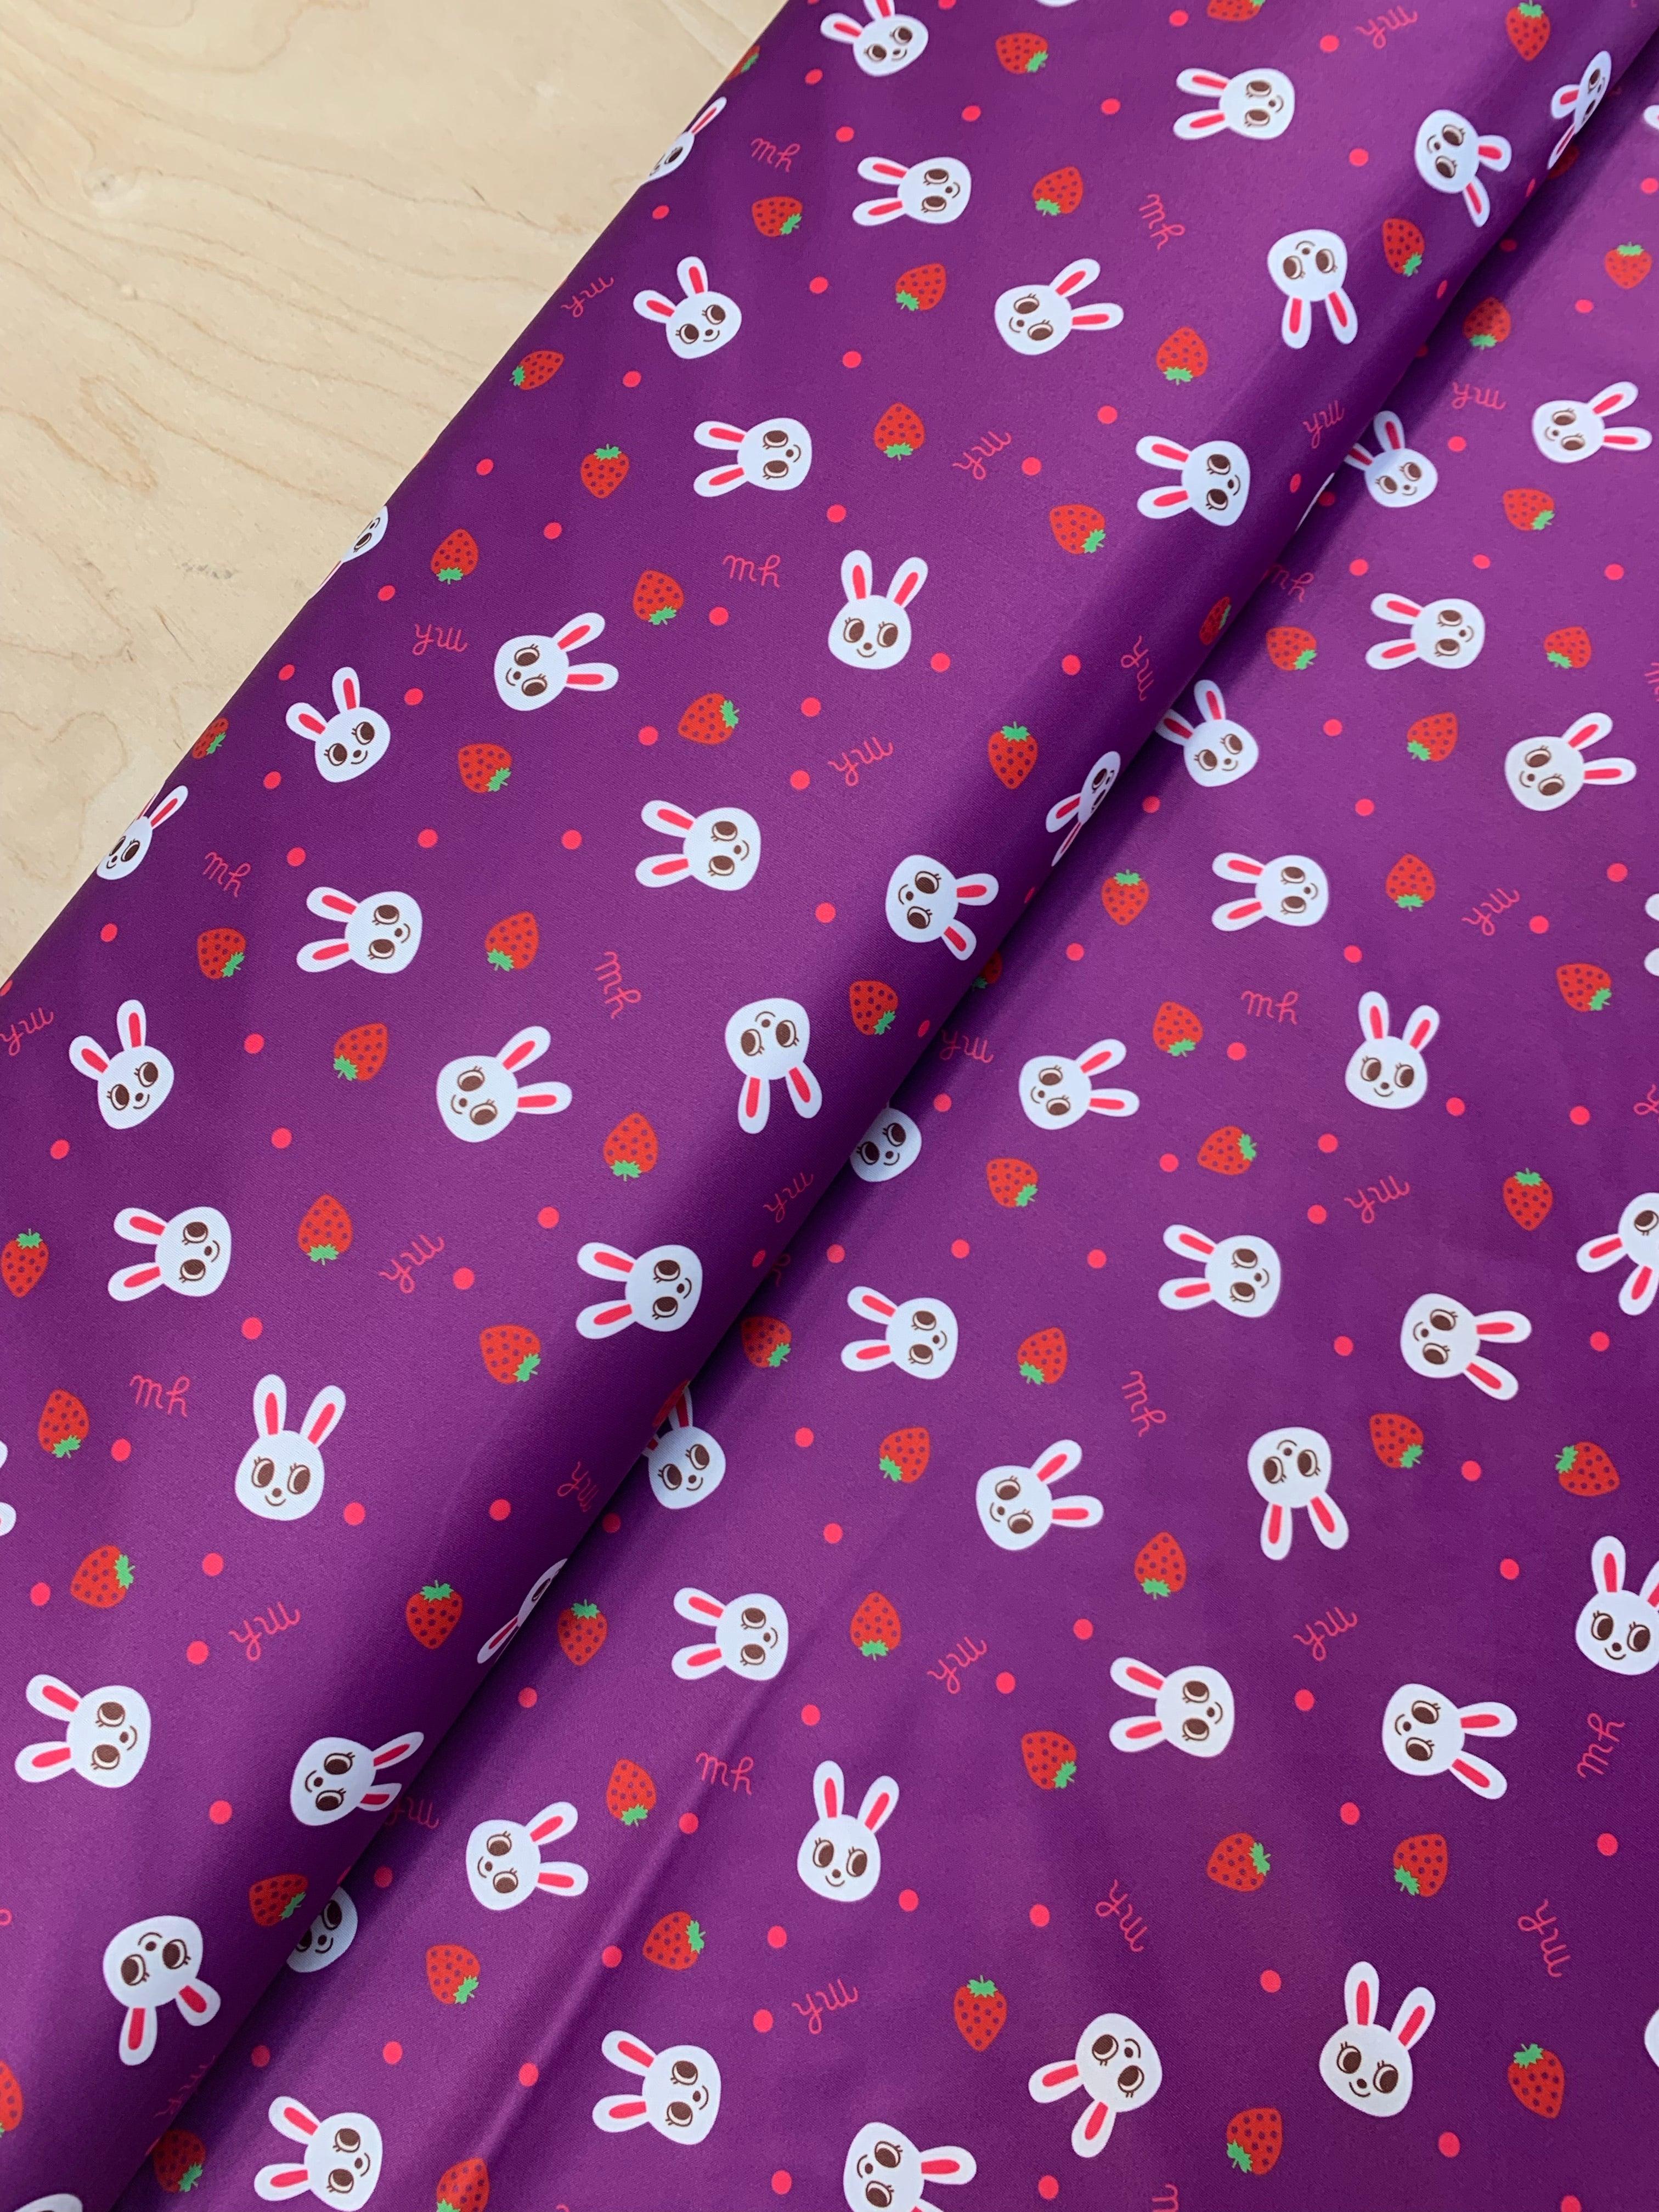 Bunnies and Strawberries on Purple PUL